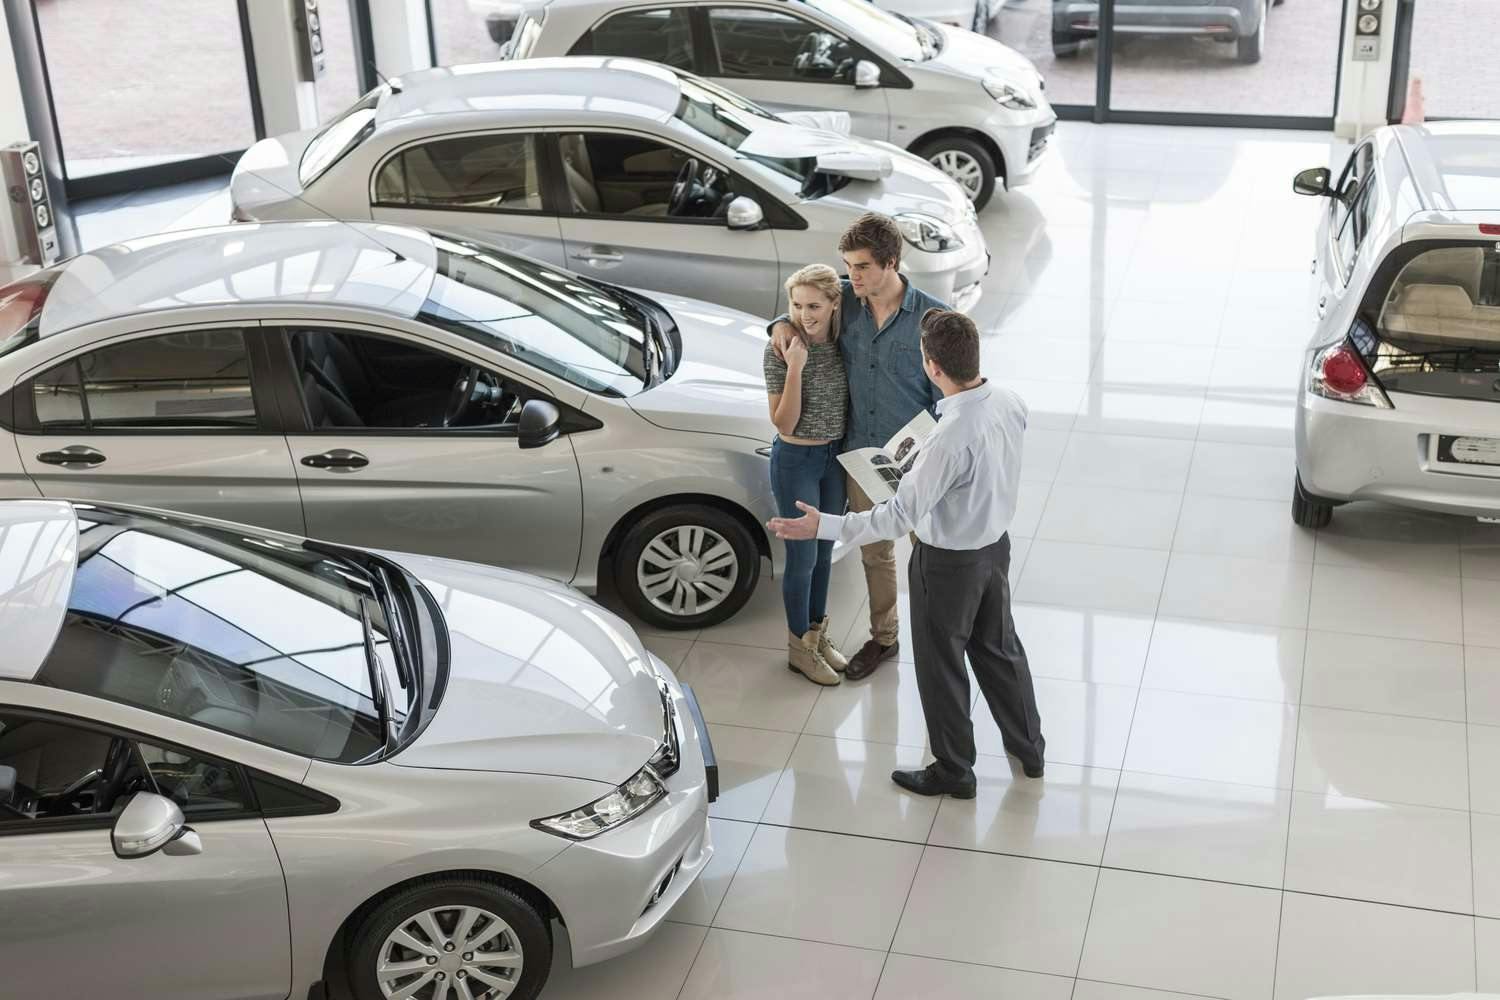 The Business HR Guide to Car Dealership Platforms